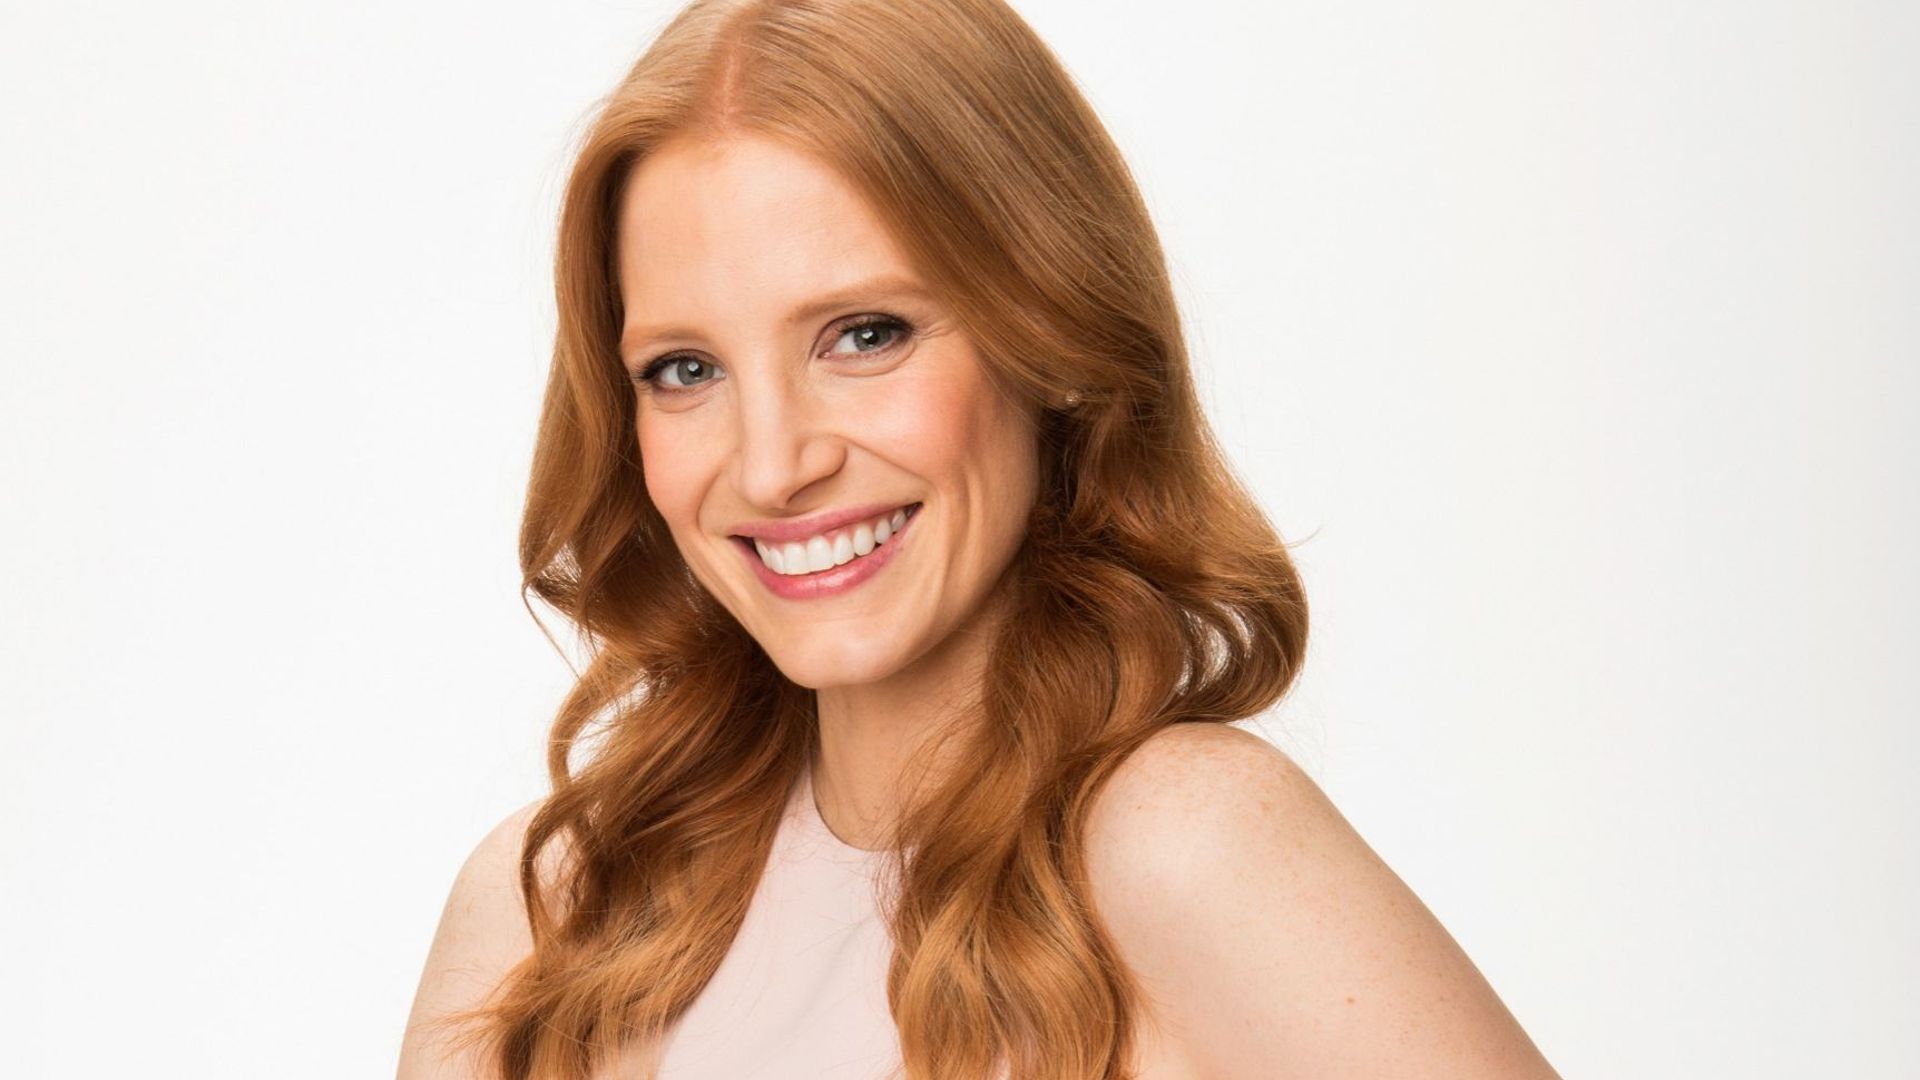 Wallpaper Smile, beautiful, red head, Jessica Chastain